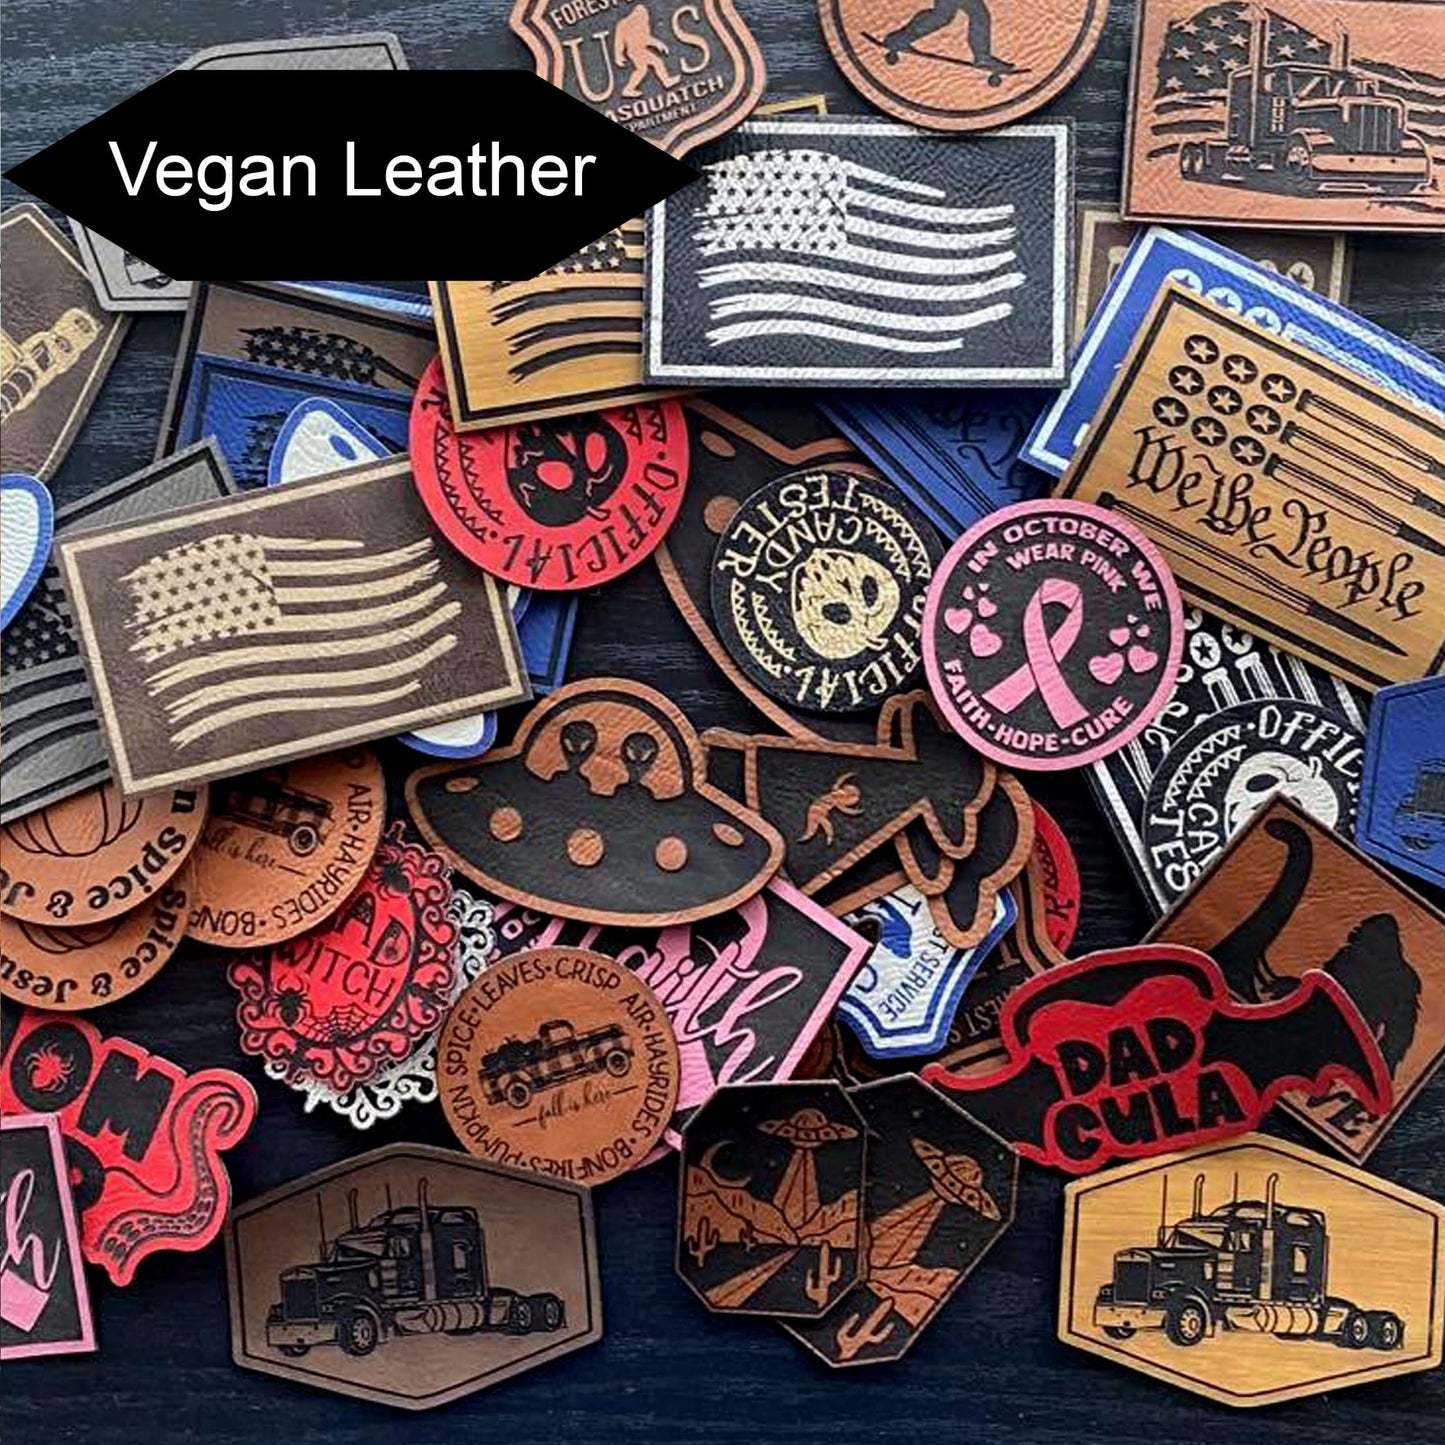 Custom Patches for Business, Events, Promotion - Vegan Leather –  patchpalooza